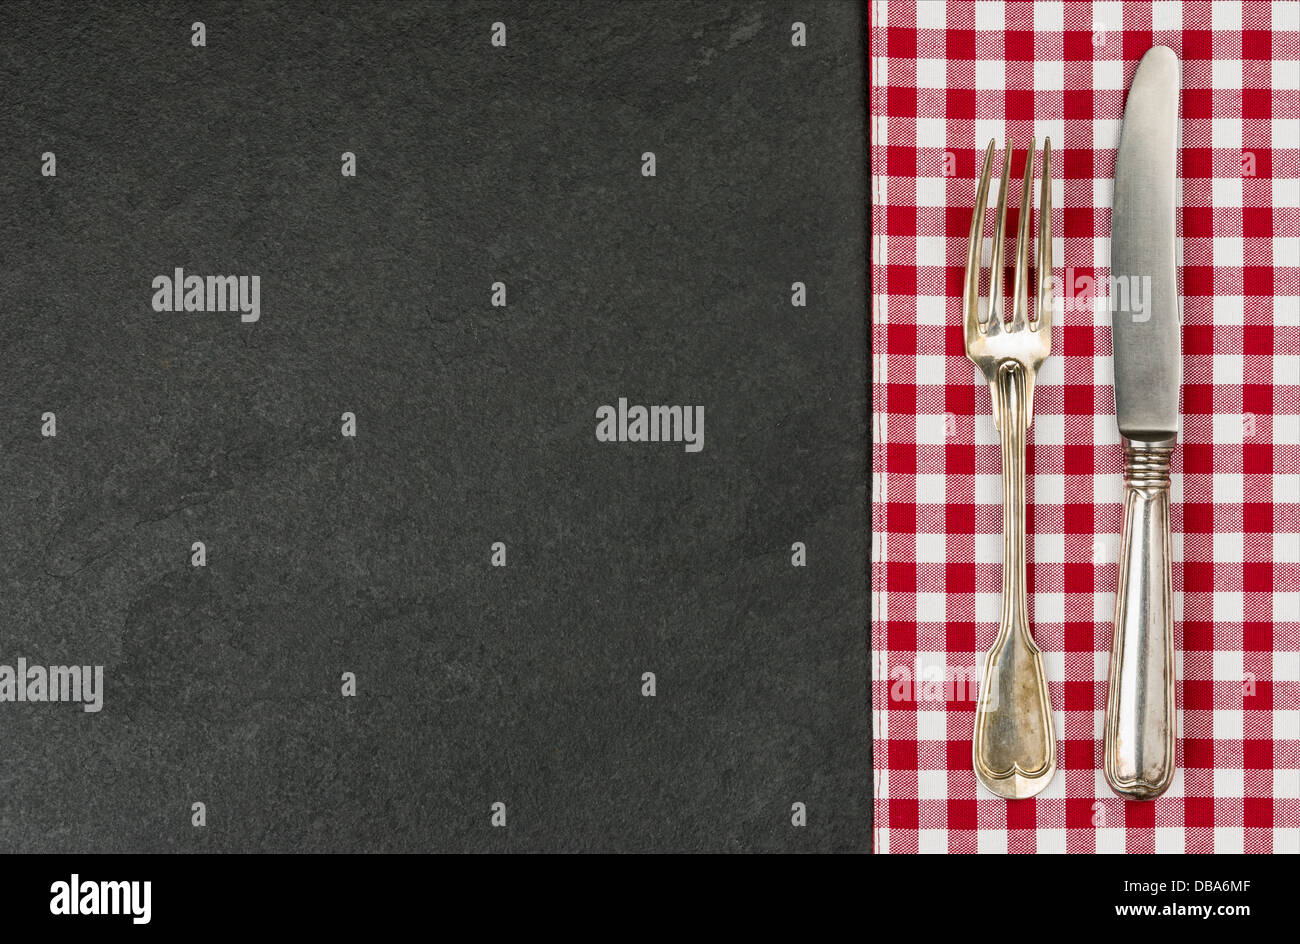 Silverware on a slate plate with a red checkered tablecloth Stock Photo